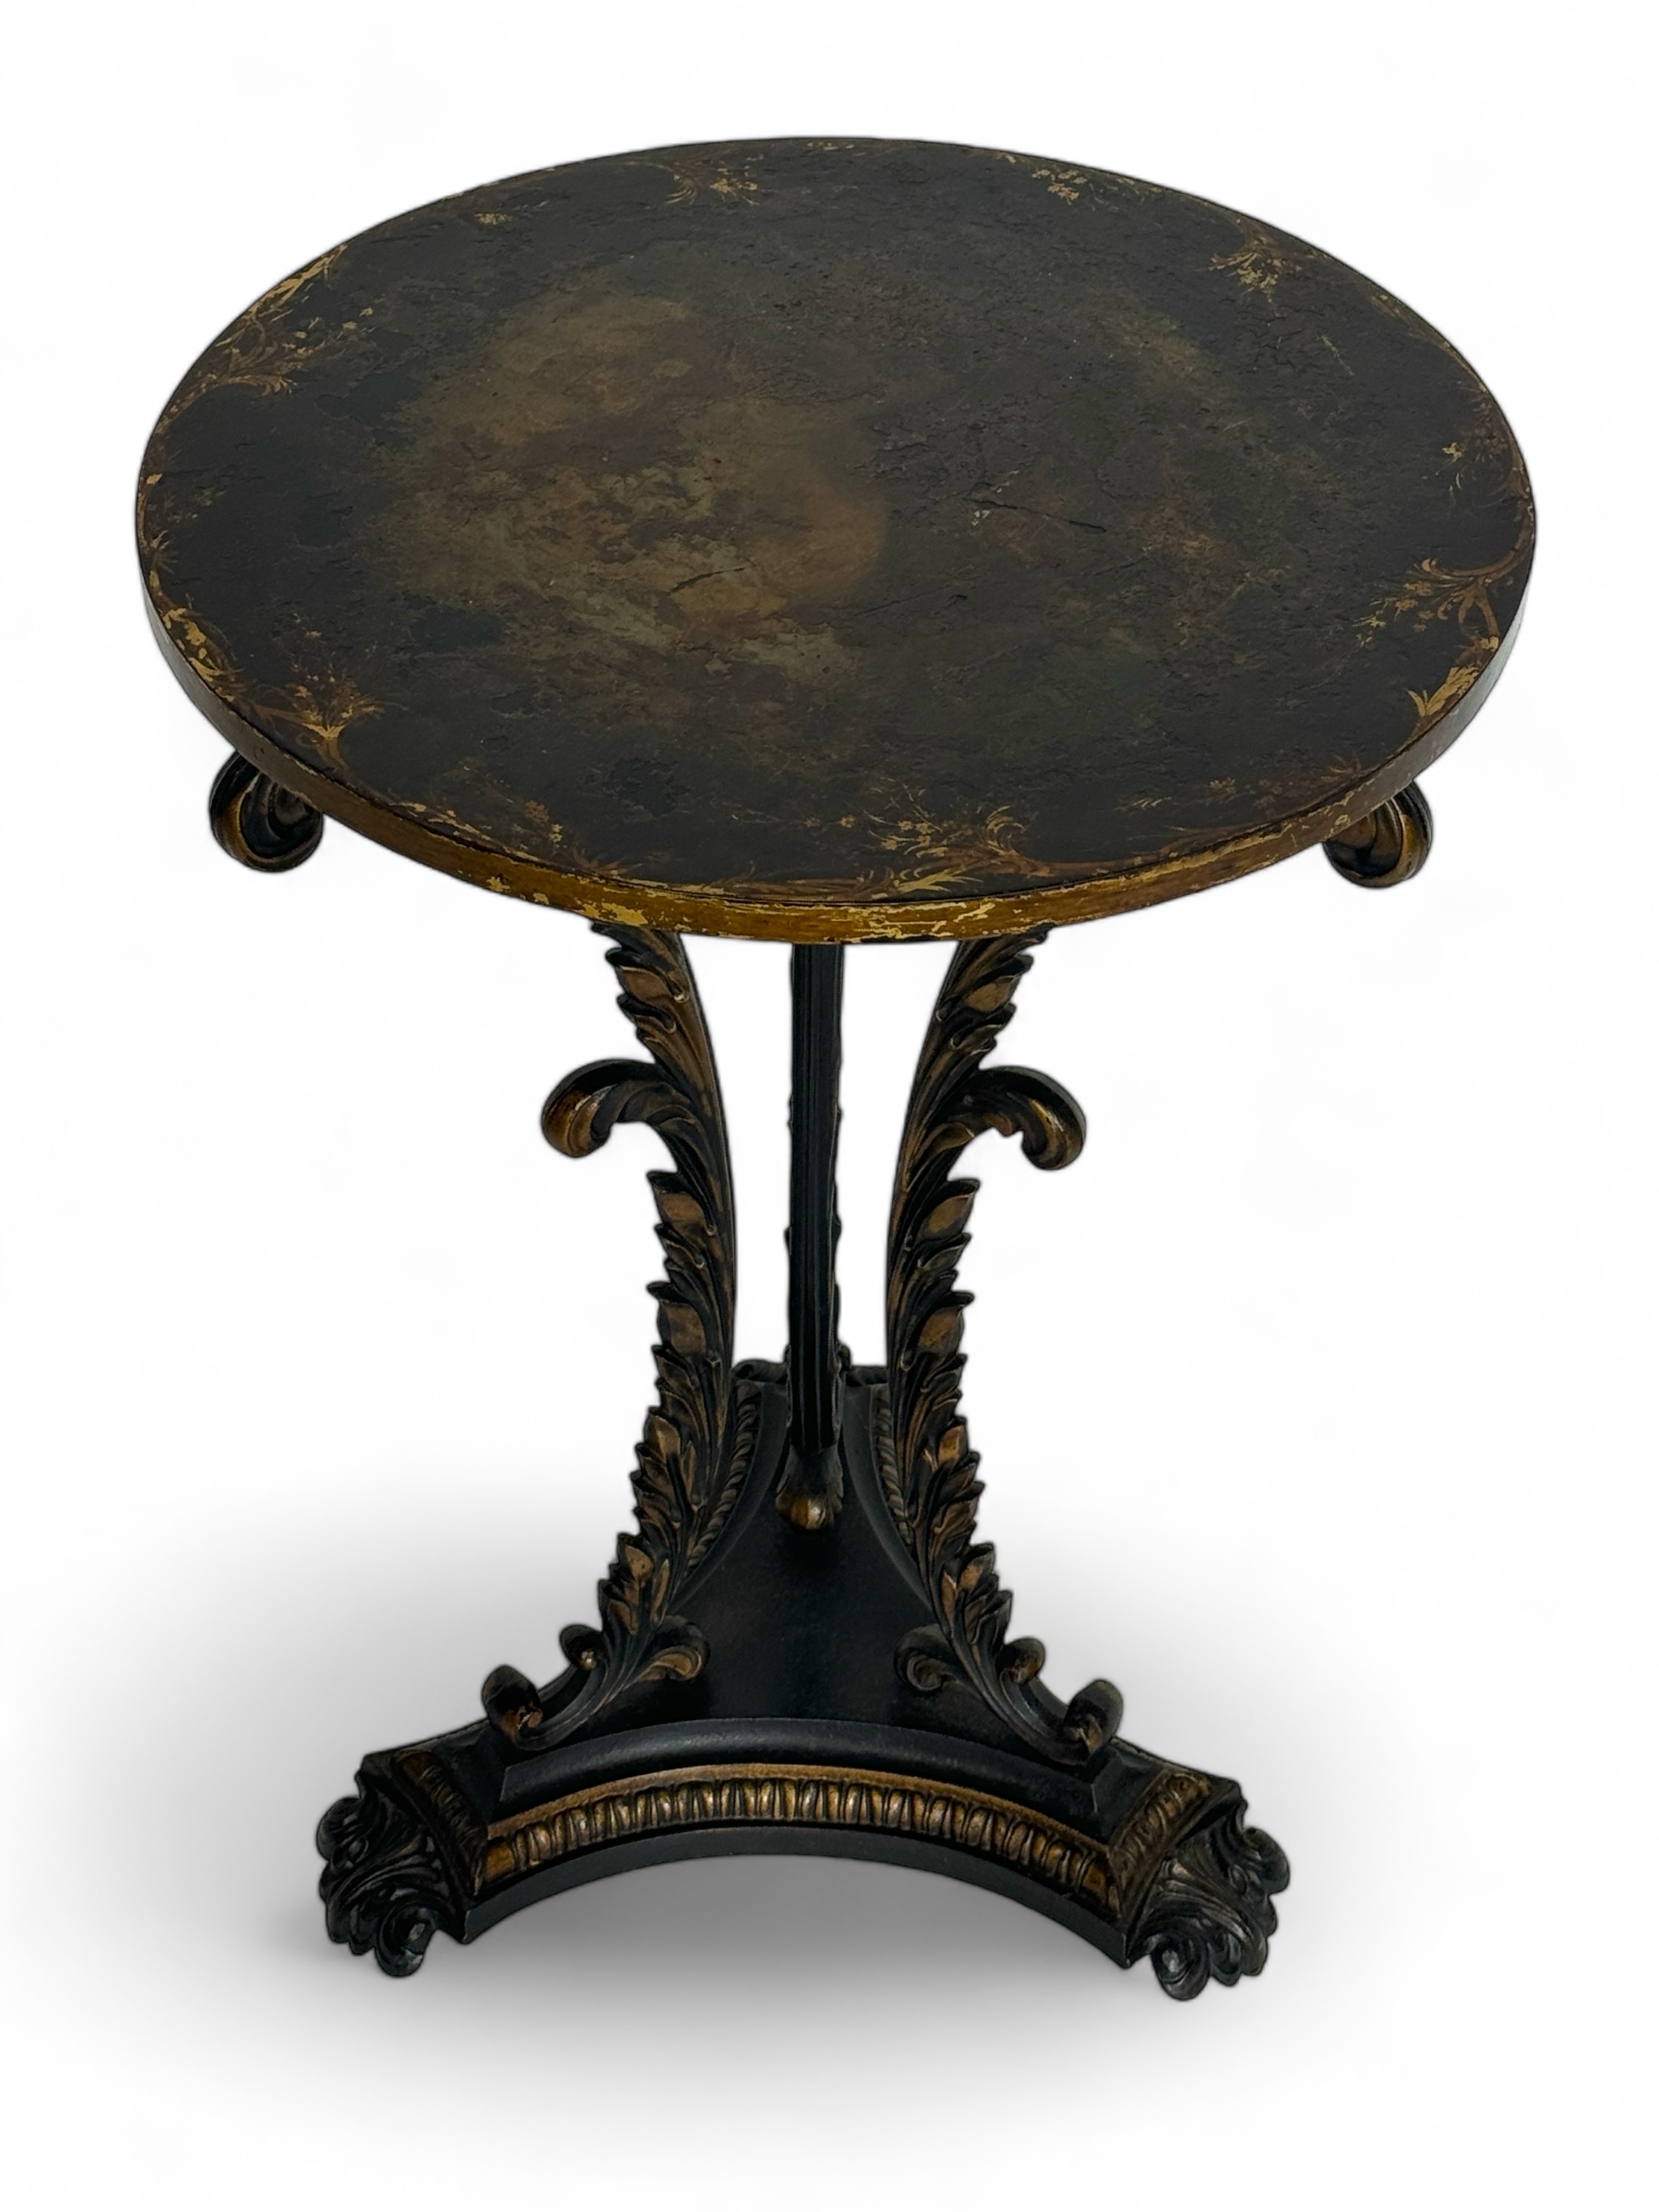 A 19th century cast iron occasional table - Image 7 of 7